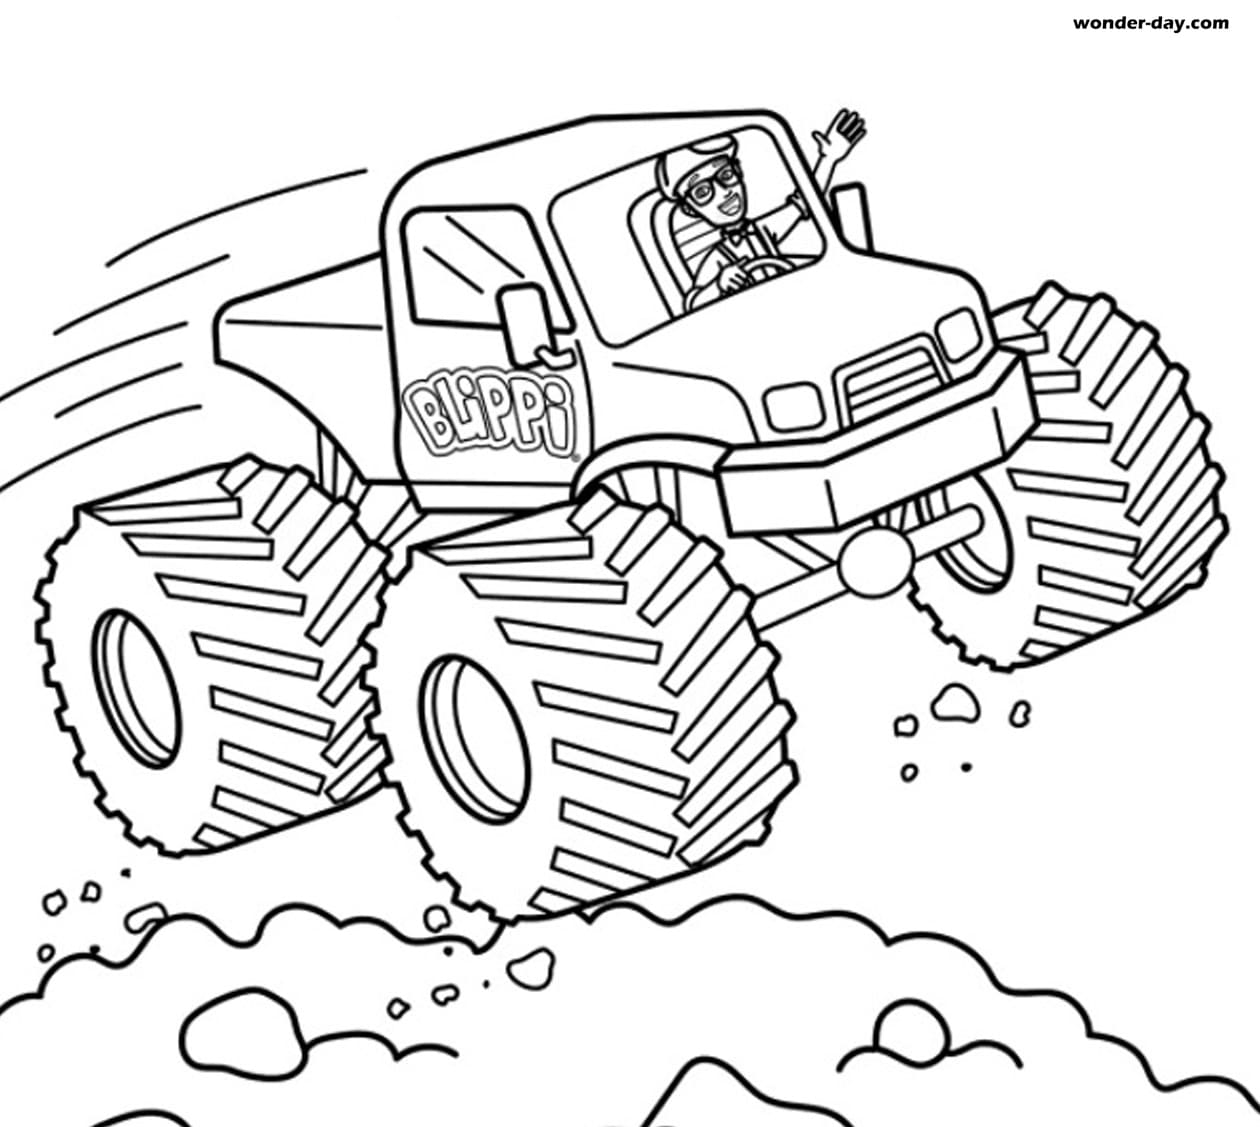 Blippi Coloring Pages For Kids